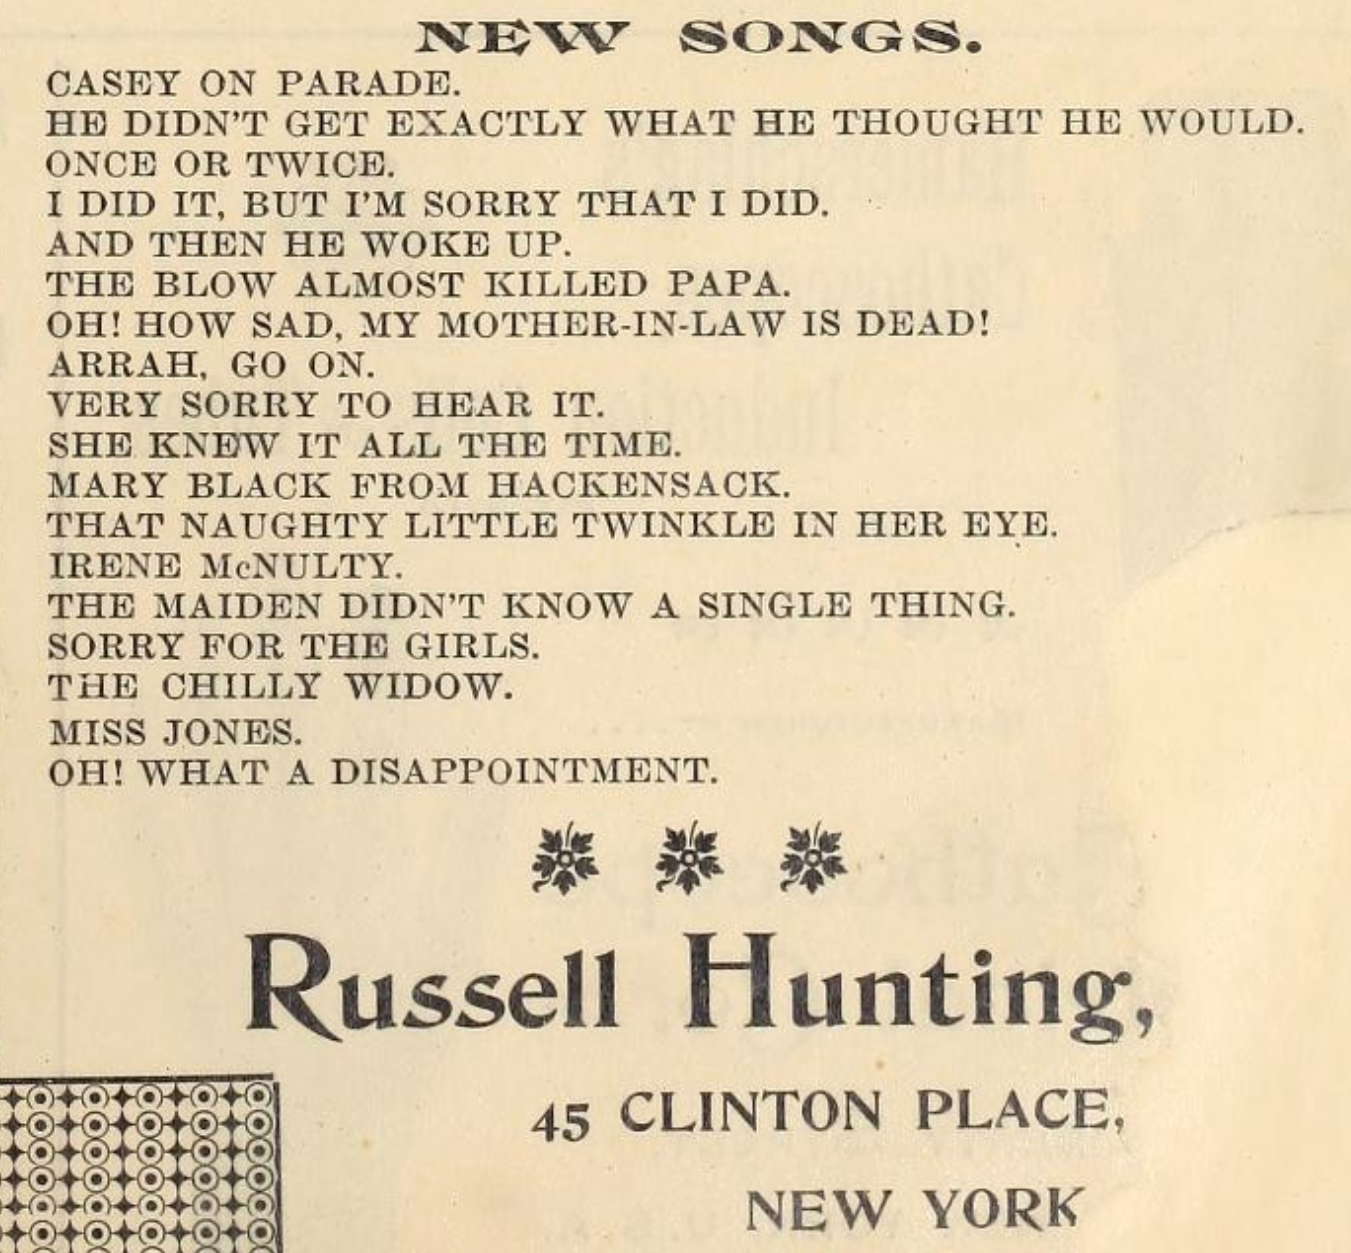 An 1896 ad for Russell Hunting songs.